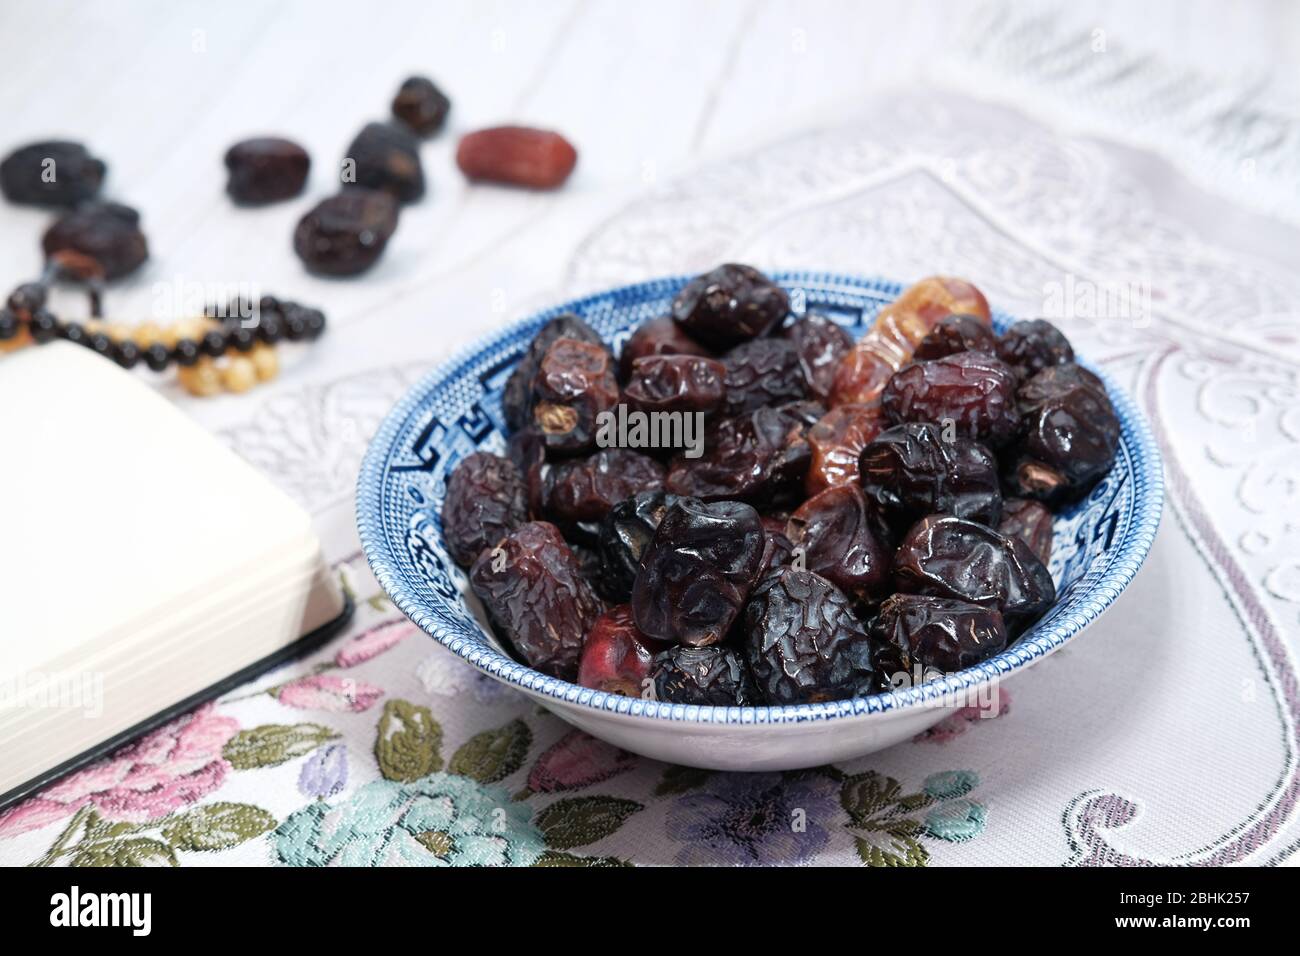 the concept of ramadan, close up of date fruit in a bowl Stock Photo